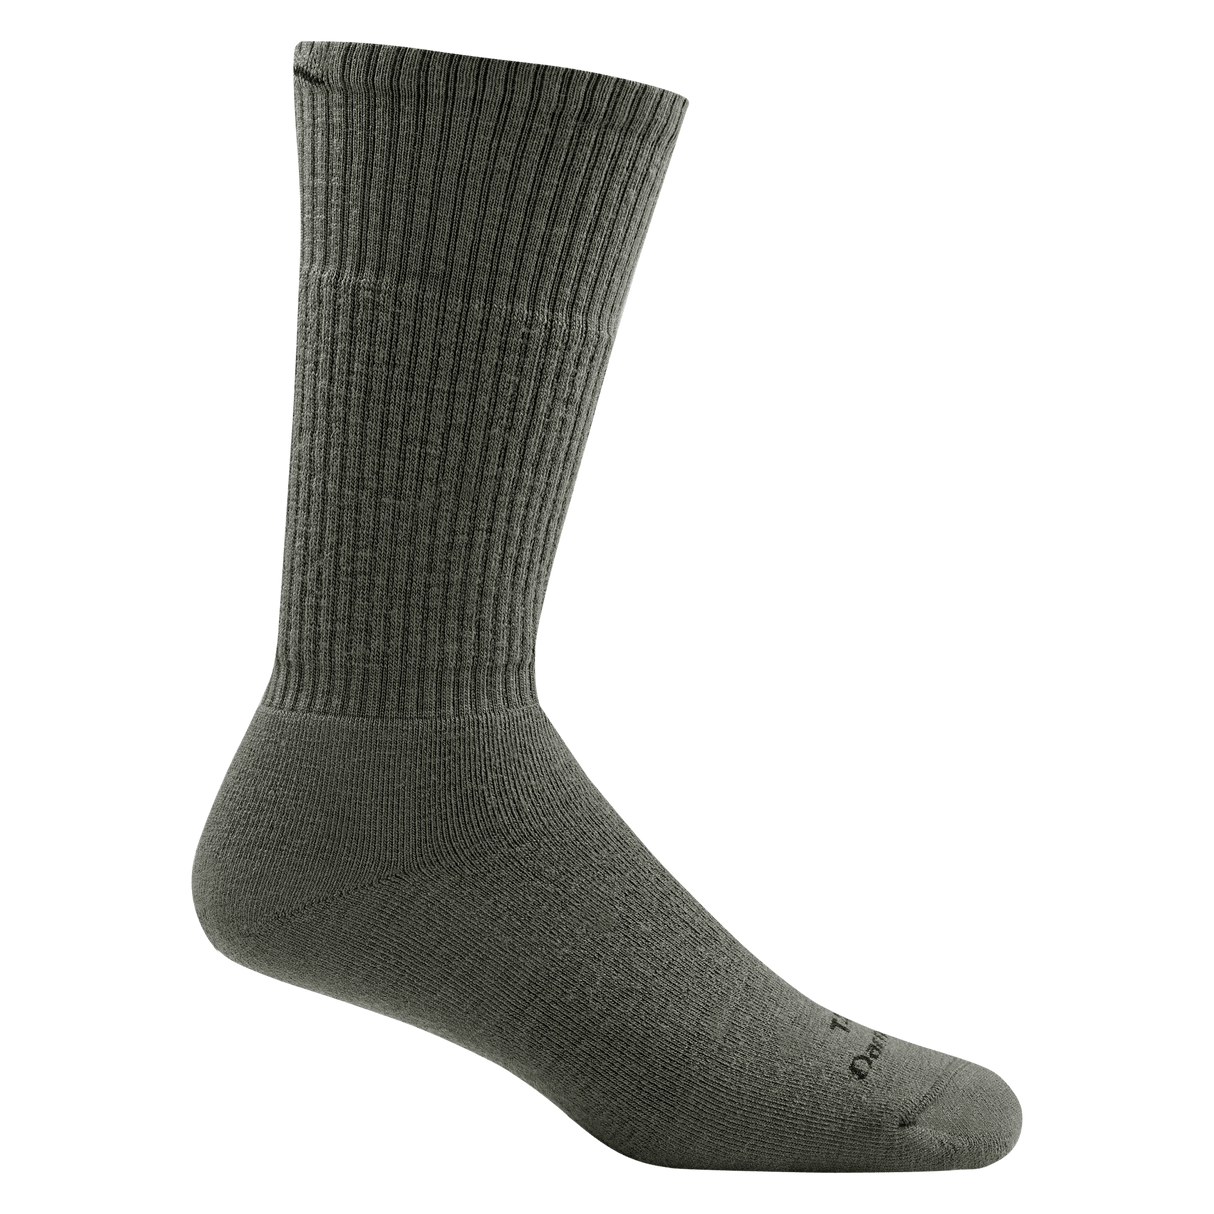 Darn Tough Boot Midweight Tactical Socks with Full Cushion  -  X-Small / Foliage Green